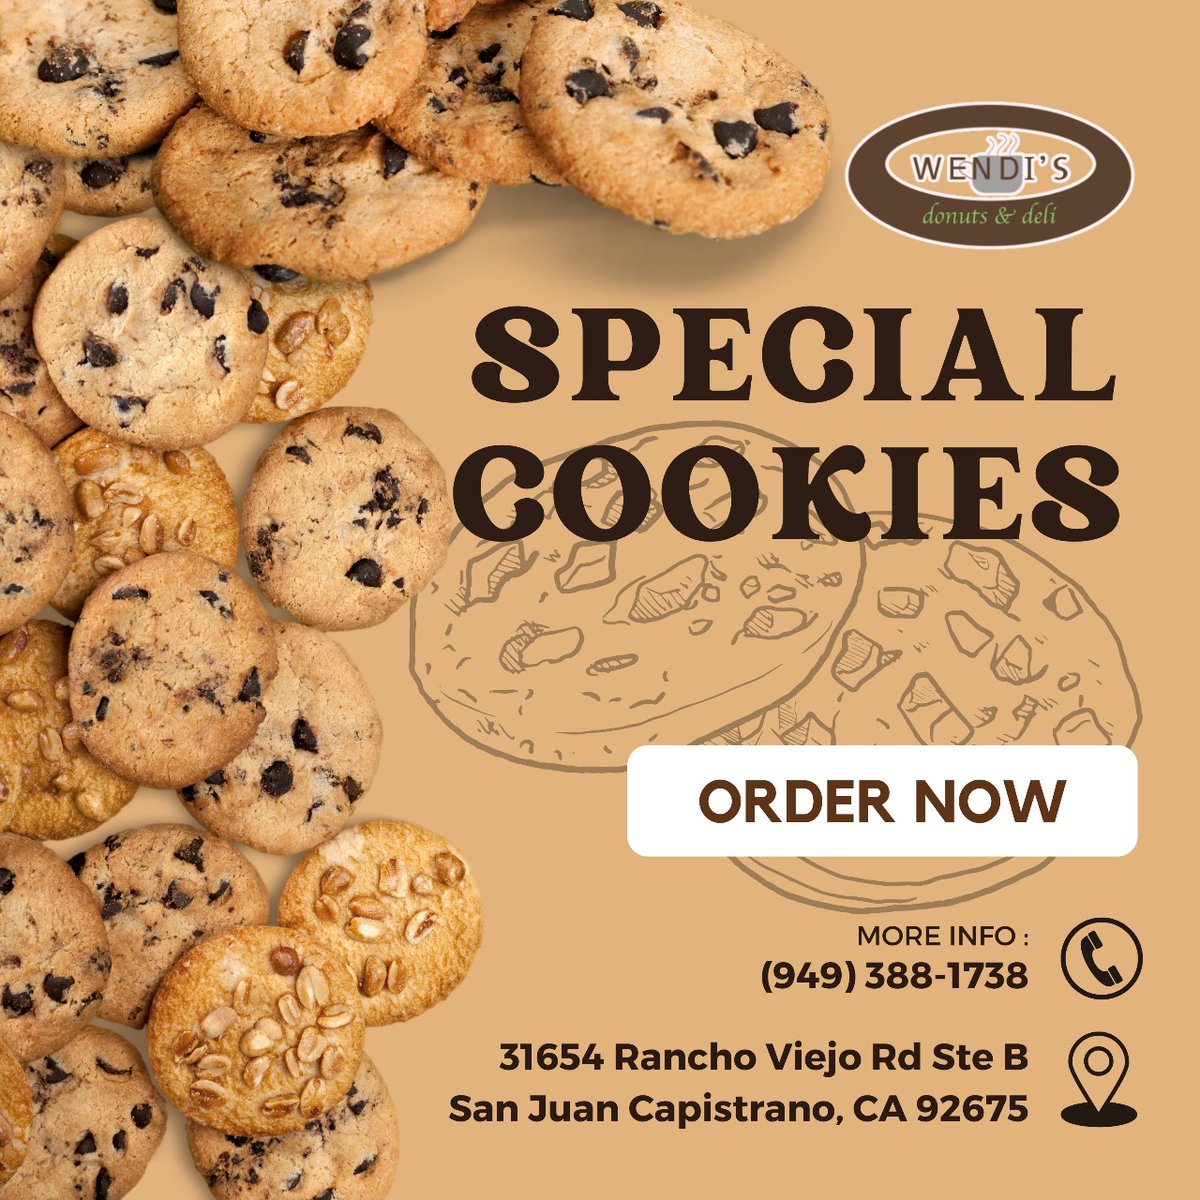 Satisfy your sweet cravings one bite at a time. Our cookies are more than just a treat – they're moments of pure joy!
.
#WendisDonuts #CaliforniaEats #SweetTreats #DonutLover #SanJuanCapistrano #CaliforniaFoodie #FoodLove #DeliciousBites #CafeLife #MorningIndulgence #treaty